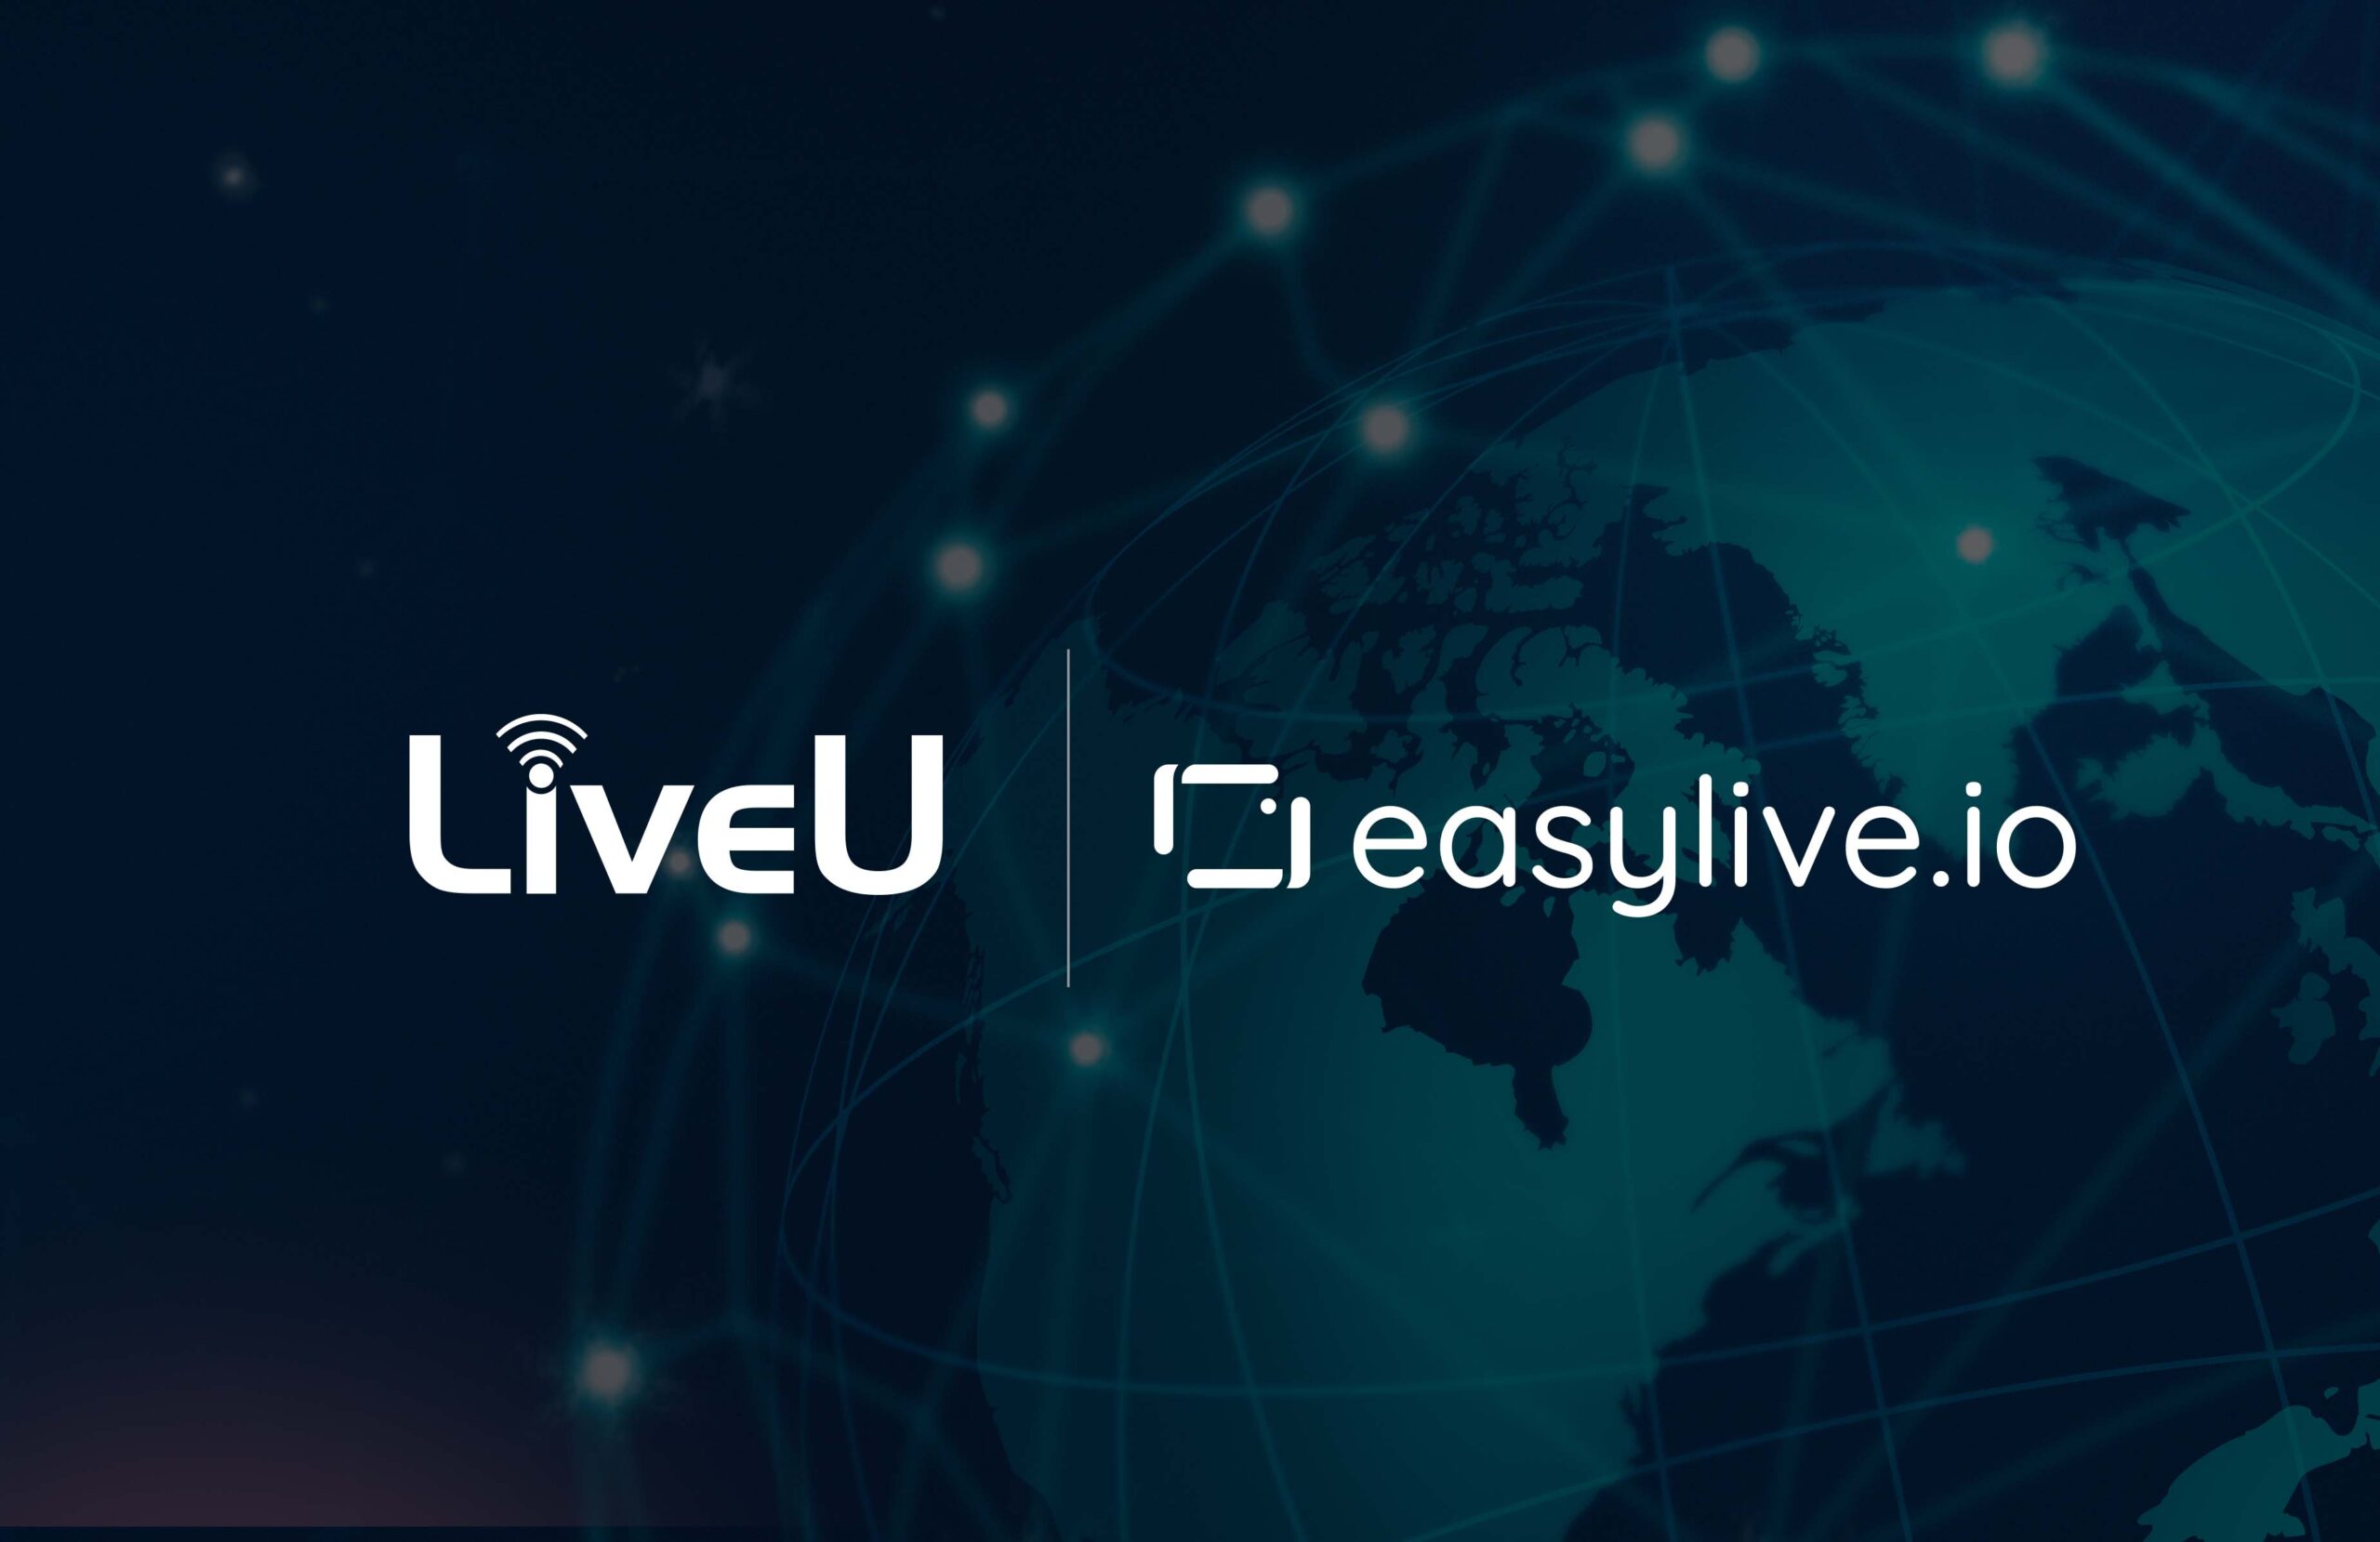 LiveU Announces the Acquisition of Cloud-based Video Production Provider easylive.io